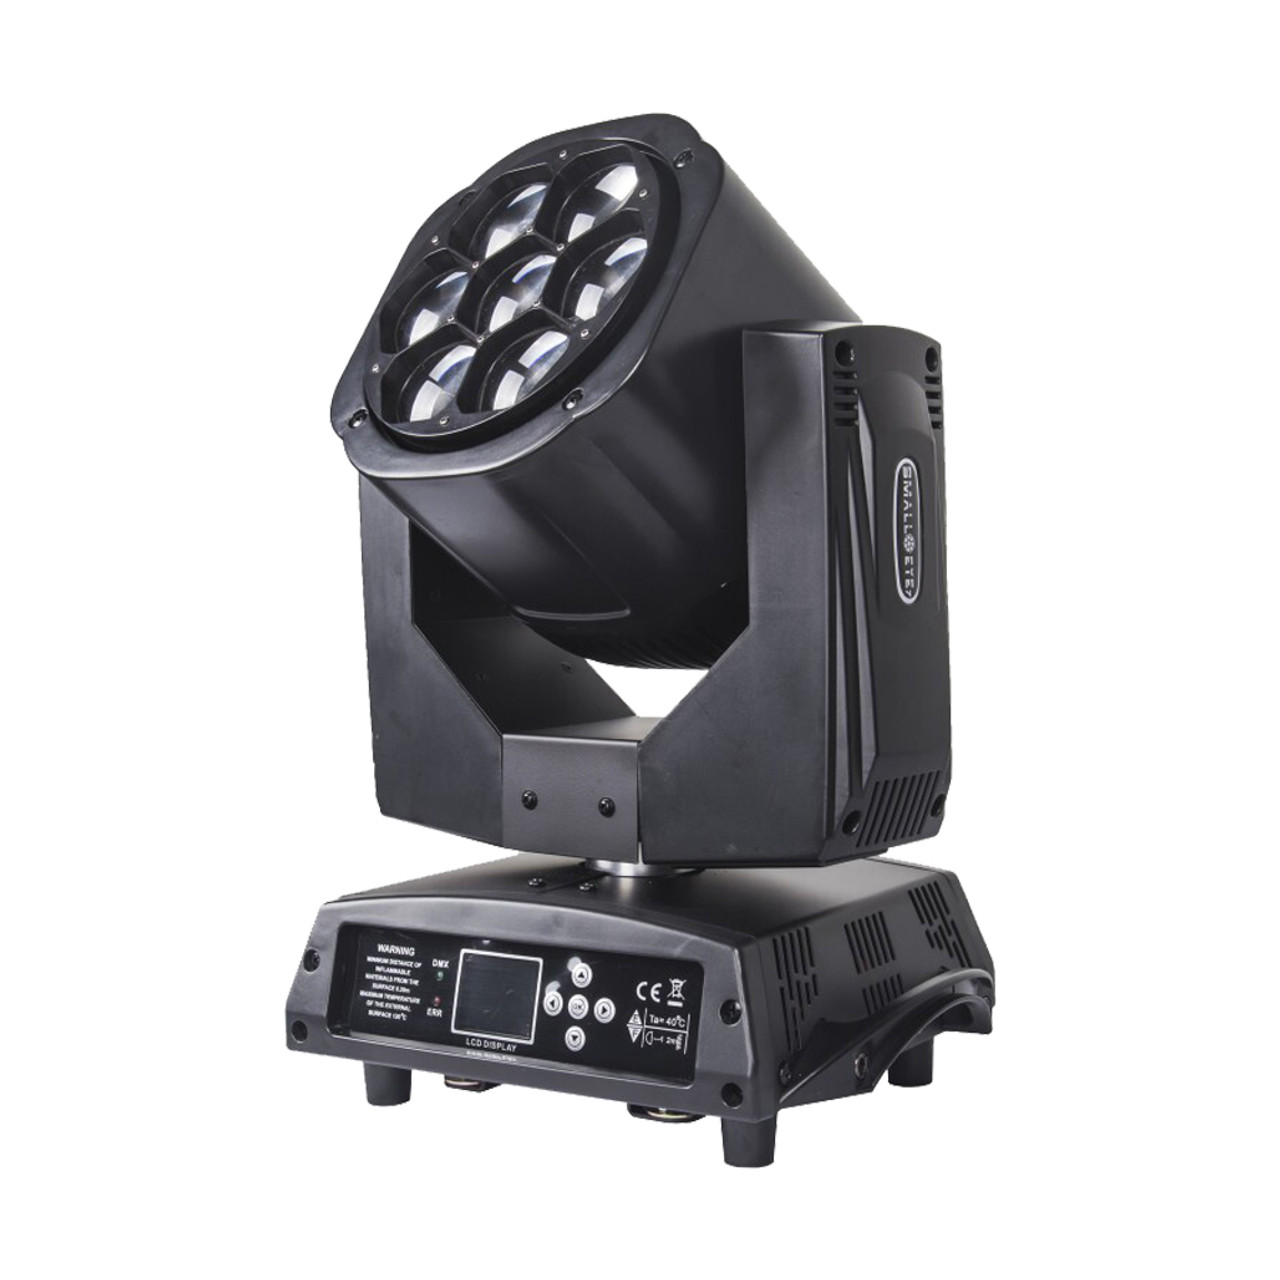 7 x 15W Bee Eyes RGBW Zoom LED Moving Head Light (A08)